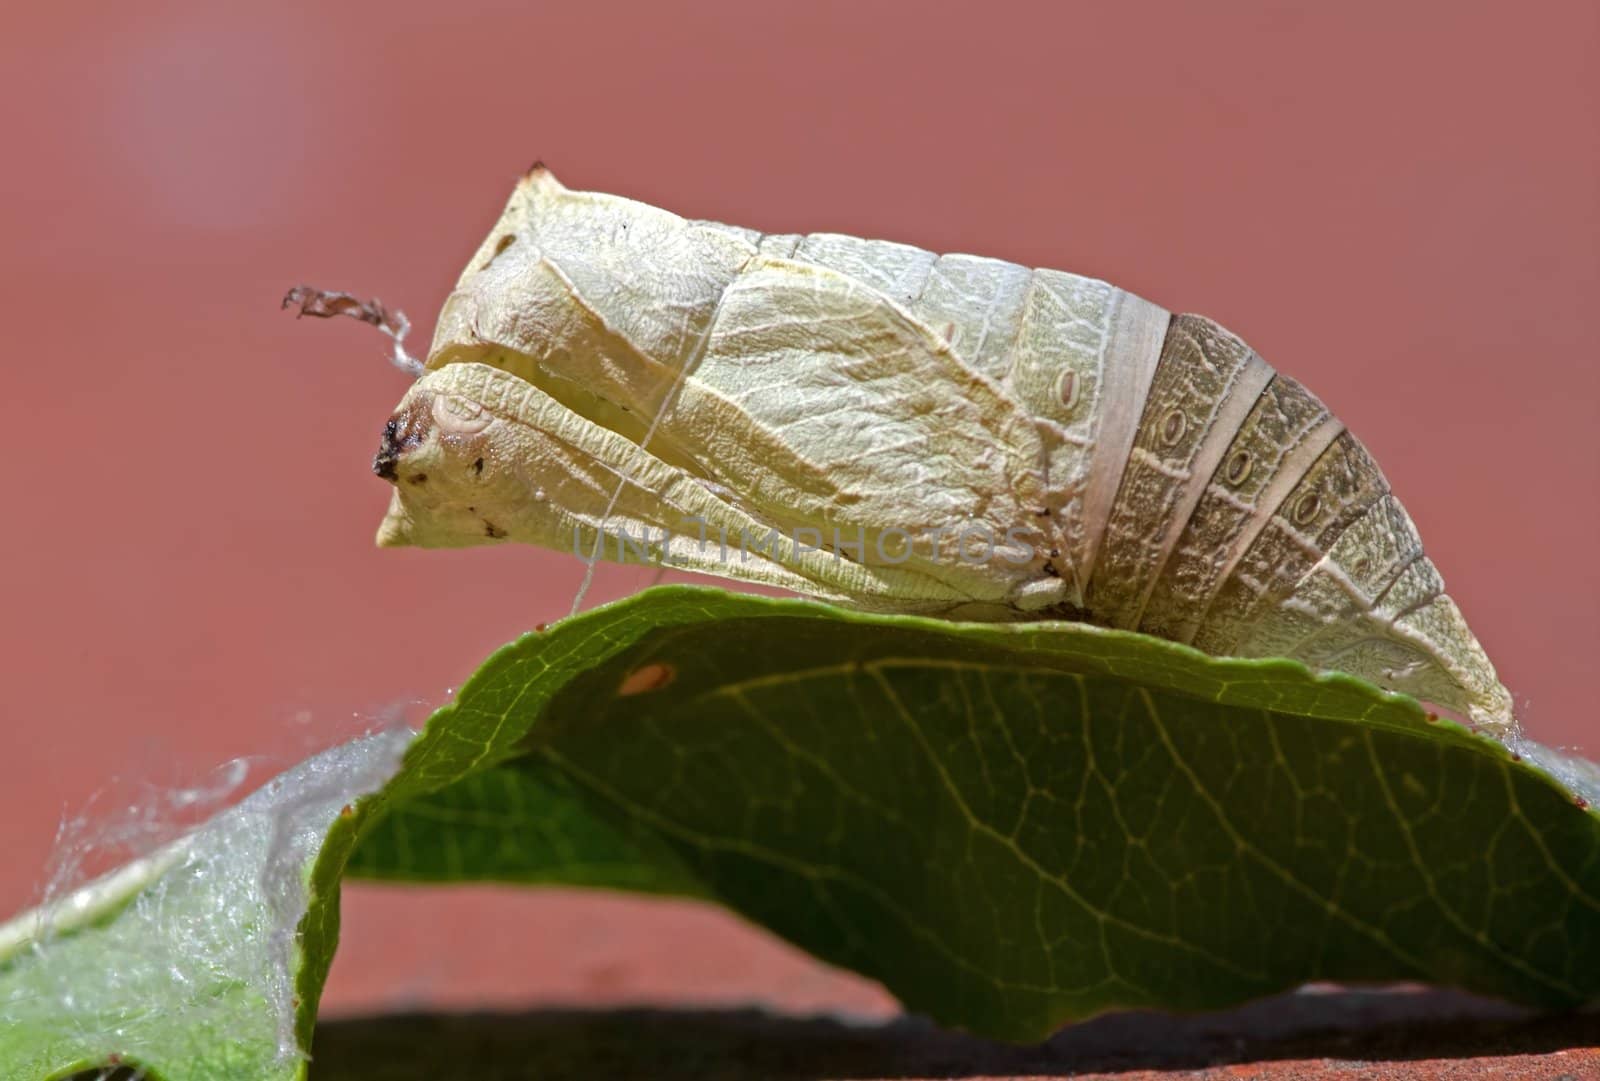 Pupa located on a leaf of peach in Italy a summar day in August